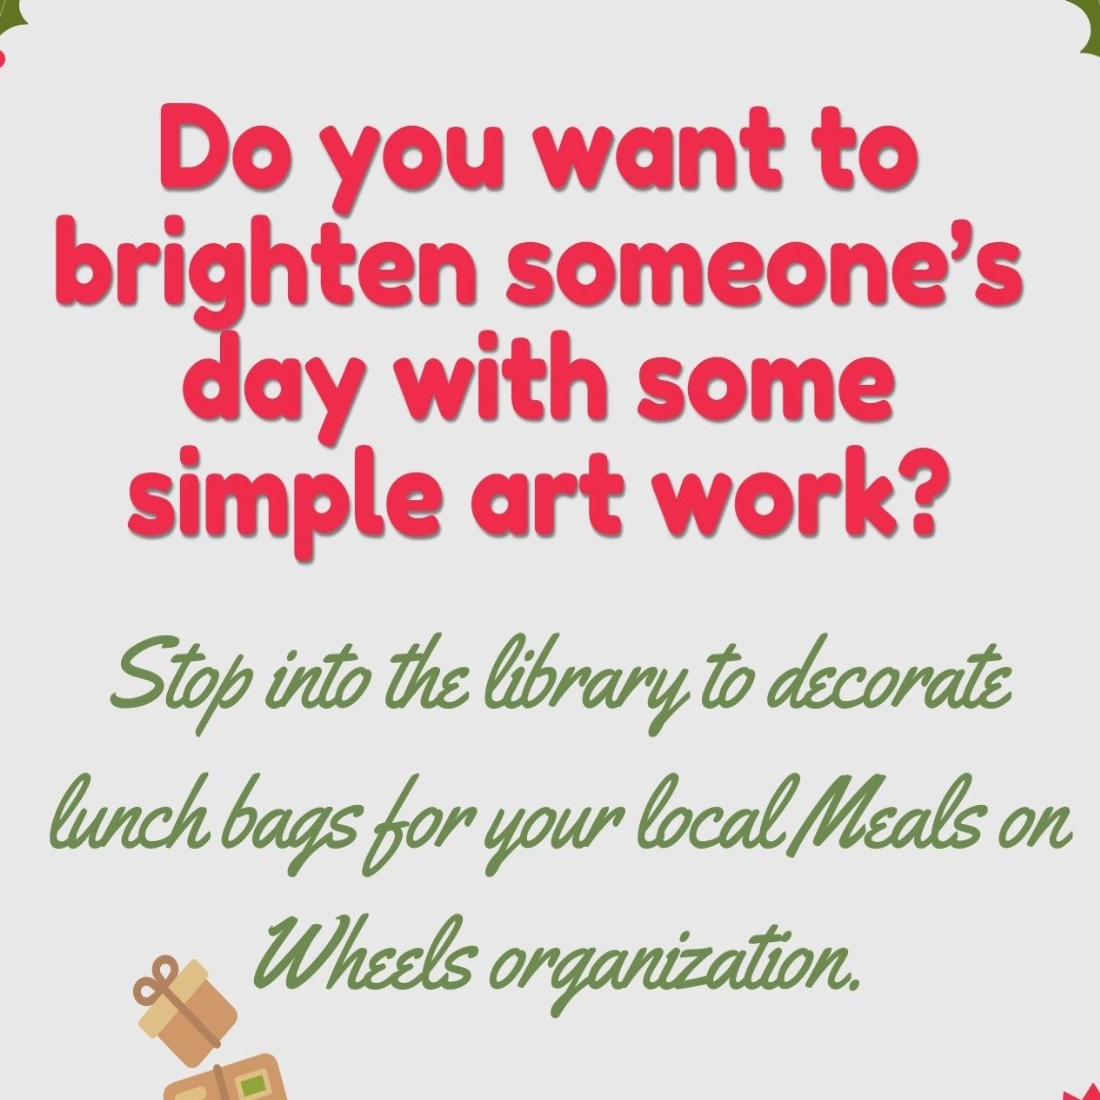 Graphic snapshot of the event flyer that reads: "do you want to brighten someone's day with some simple artwork? Stop into the library to decorate lunch bags for your local Meals on Wheels organization.